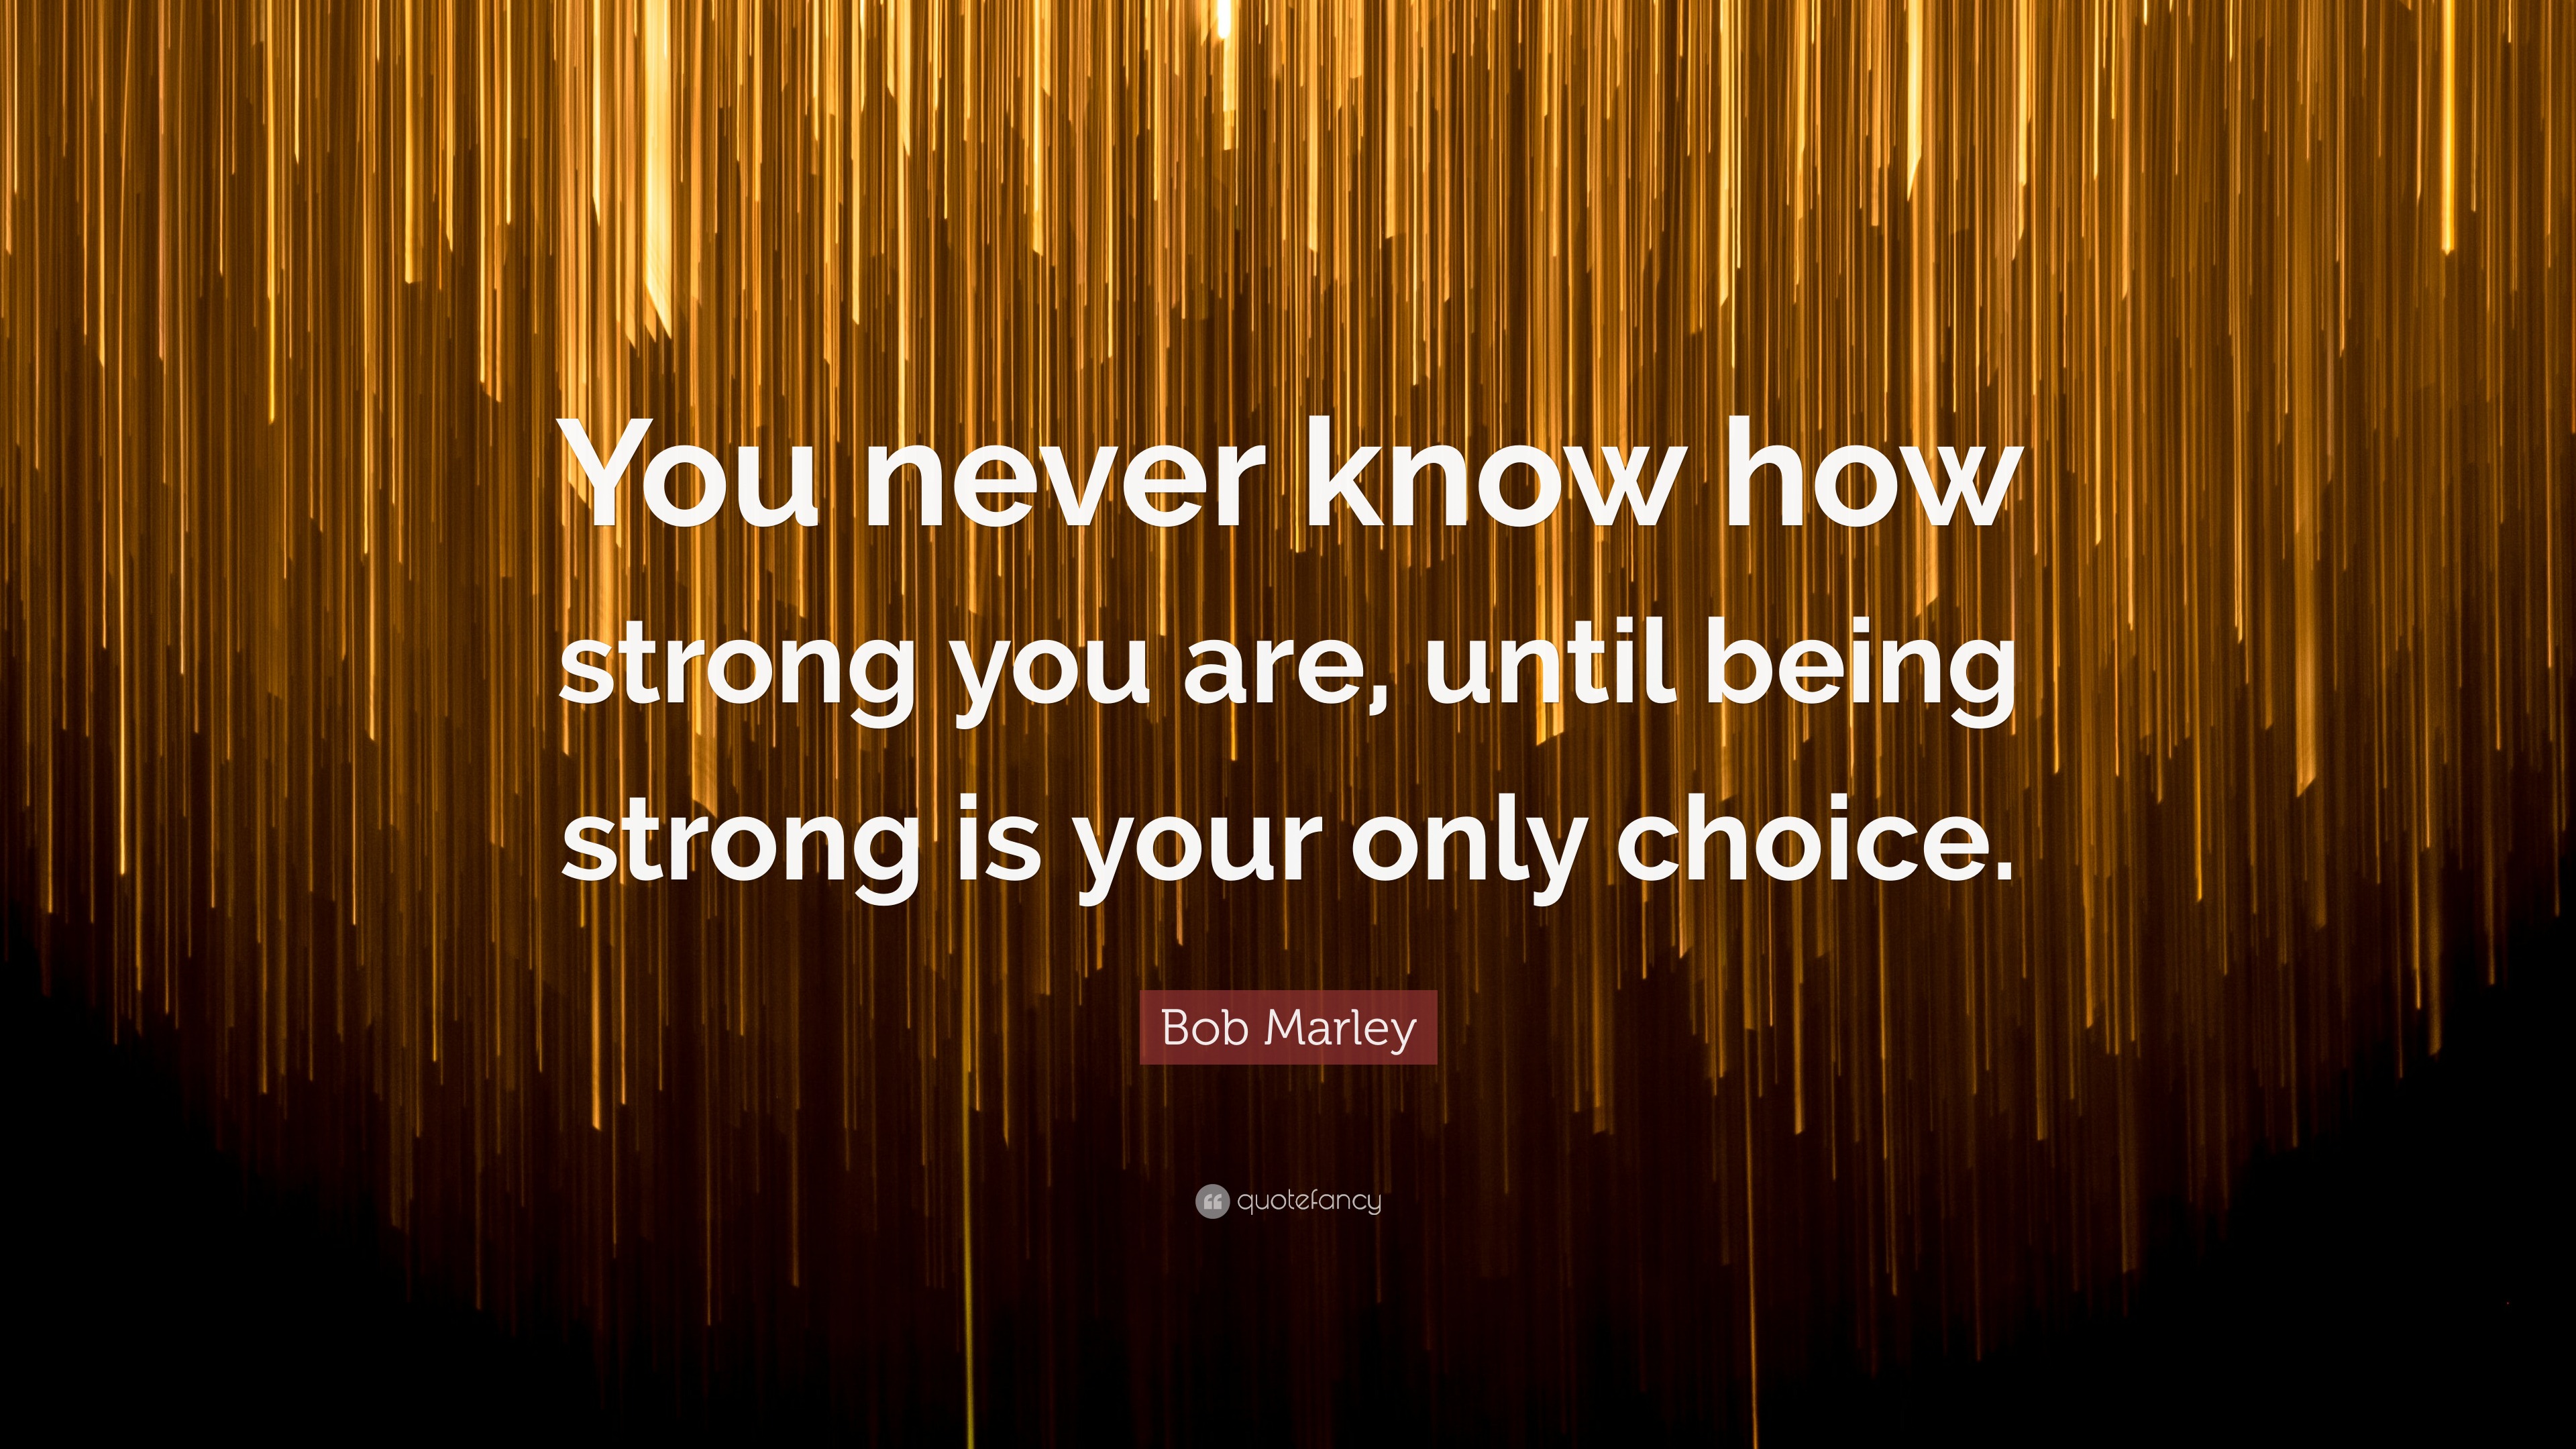 Bob Marley Quote: “You never know how strong you are, until being strong is  your only